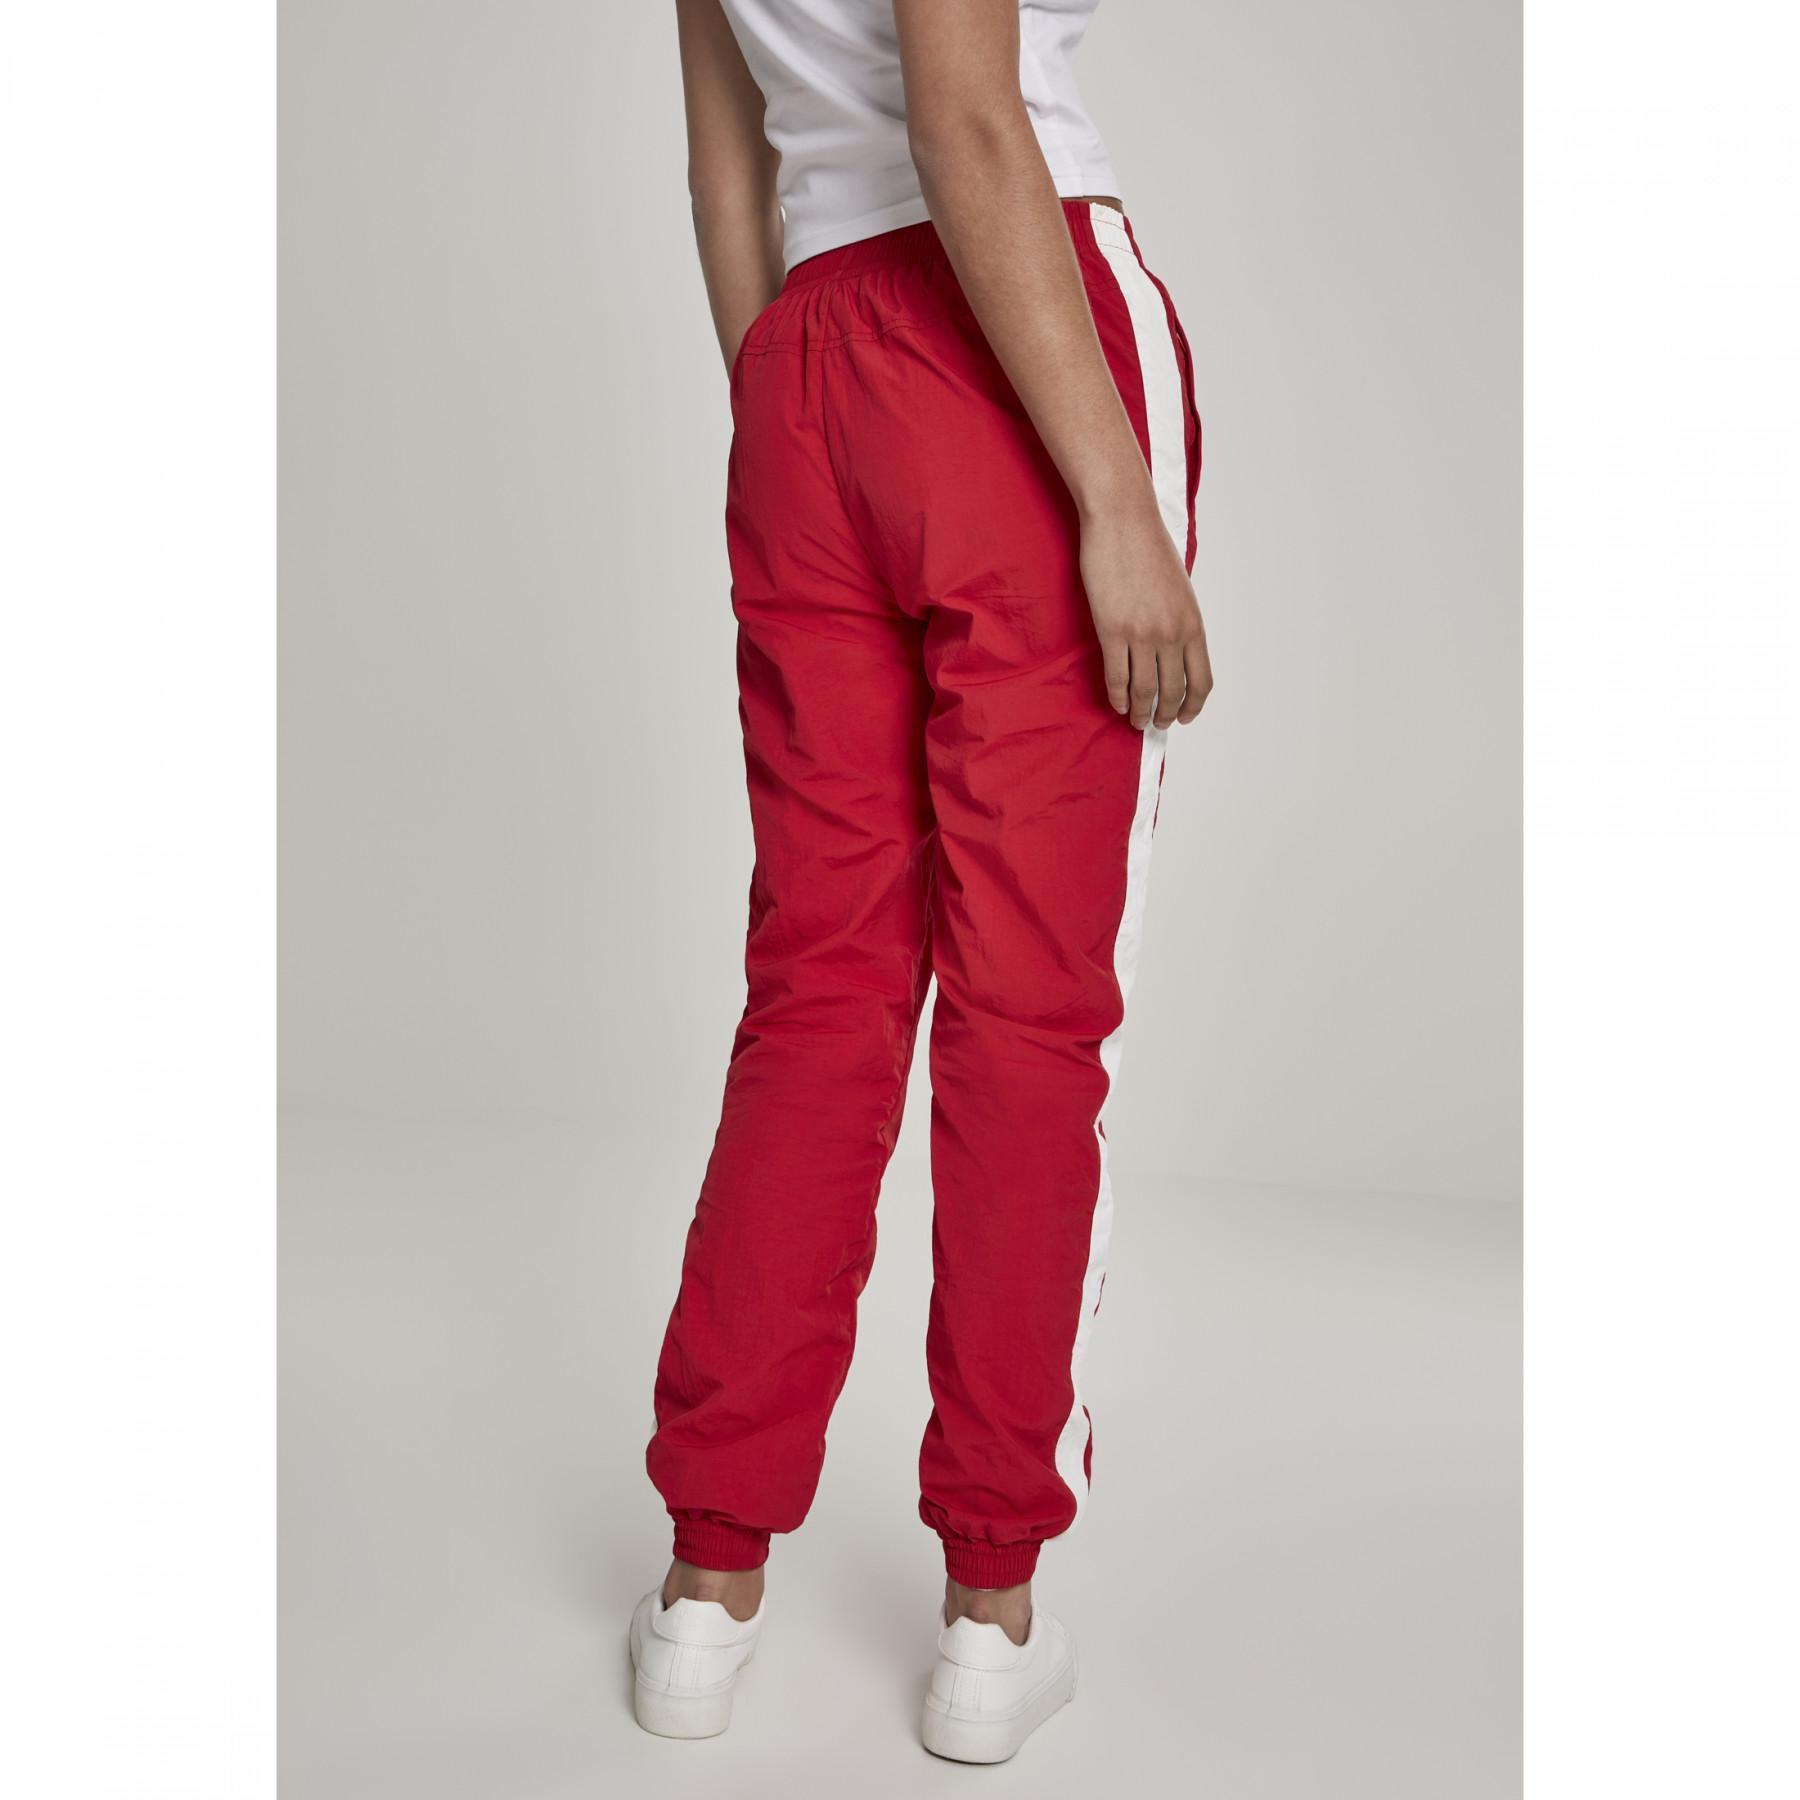 Trousers woman Urban Classic striped crinkle